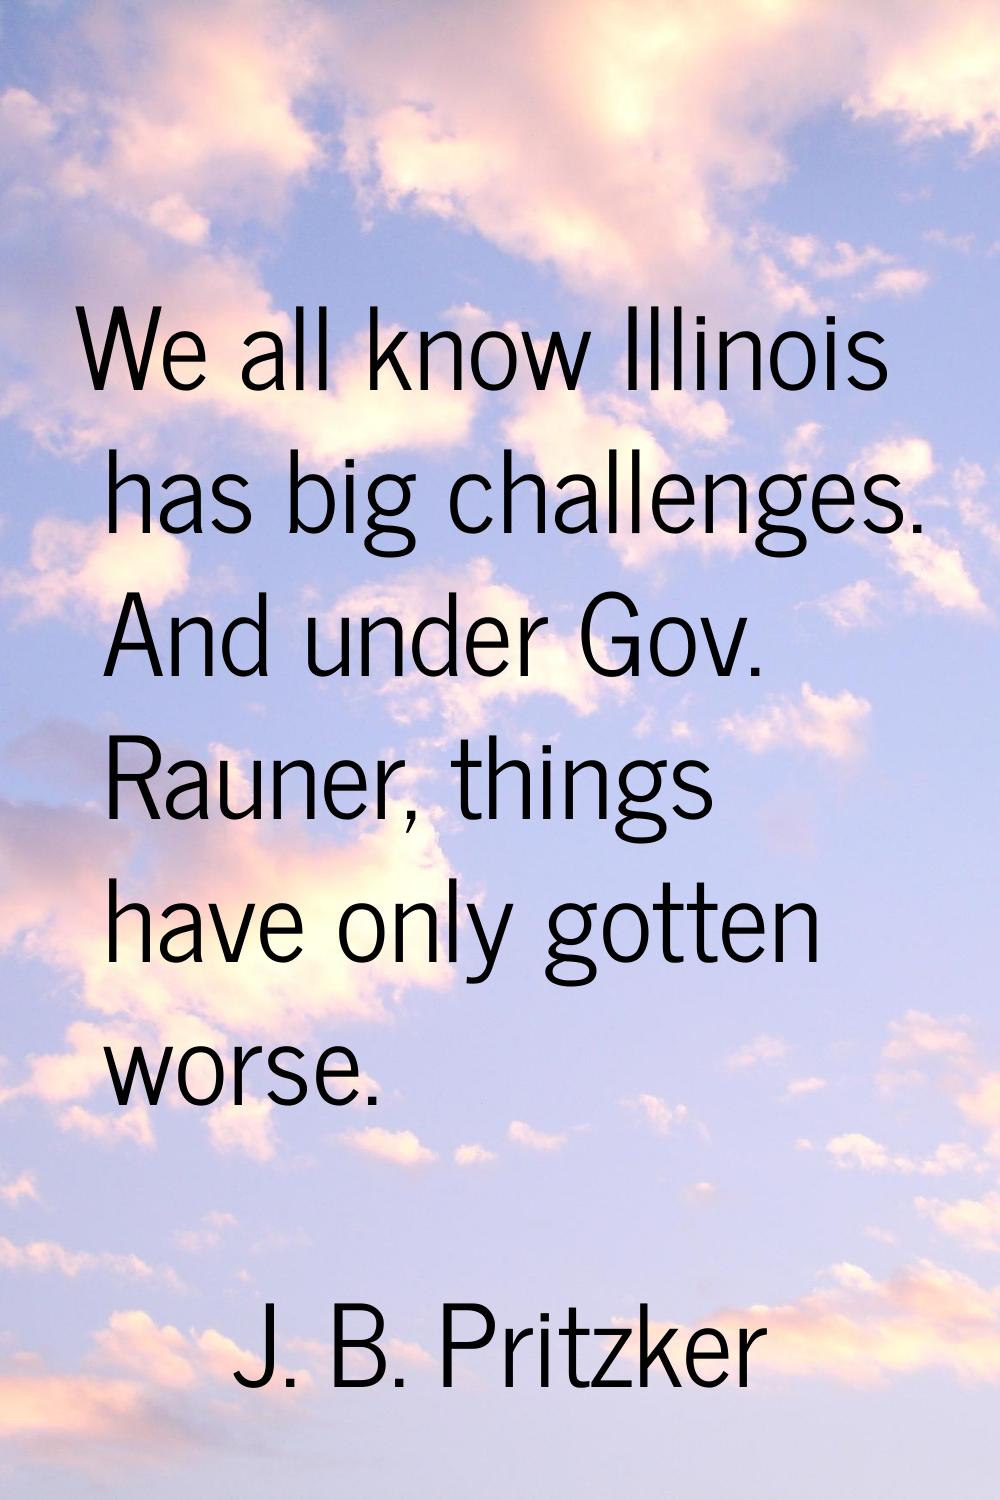 We all know Illinois has big challenges. And under Gov. Rauner, things have only gotten worse.